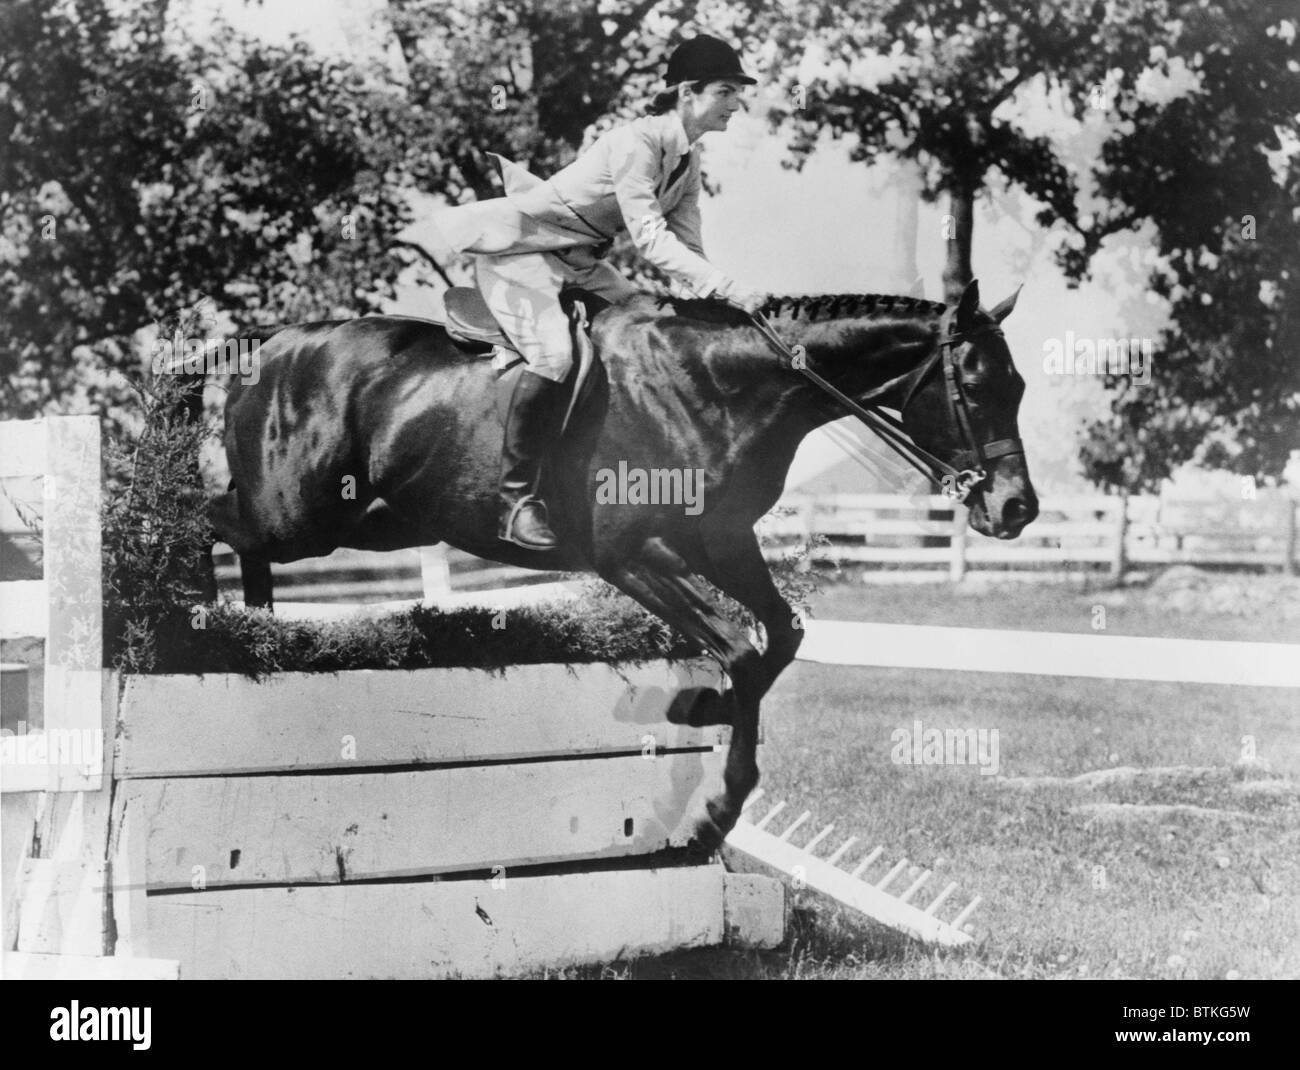 First Lady Jacqueline Kennedy, riding her horse Ninbrano, clears a hurdle at the Loudoun Hunt horse show in Leesburg, Va. May 19, 1962. Stock Photo